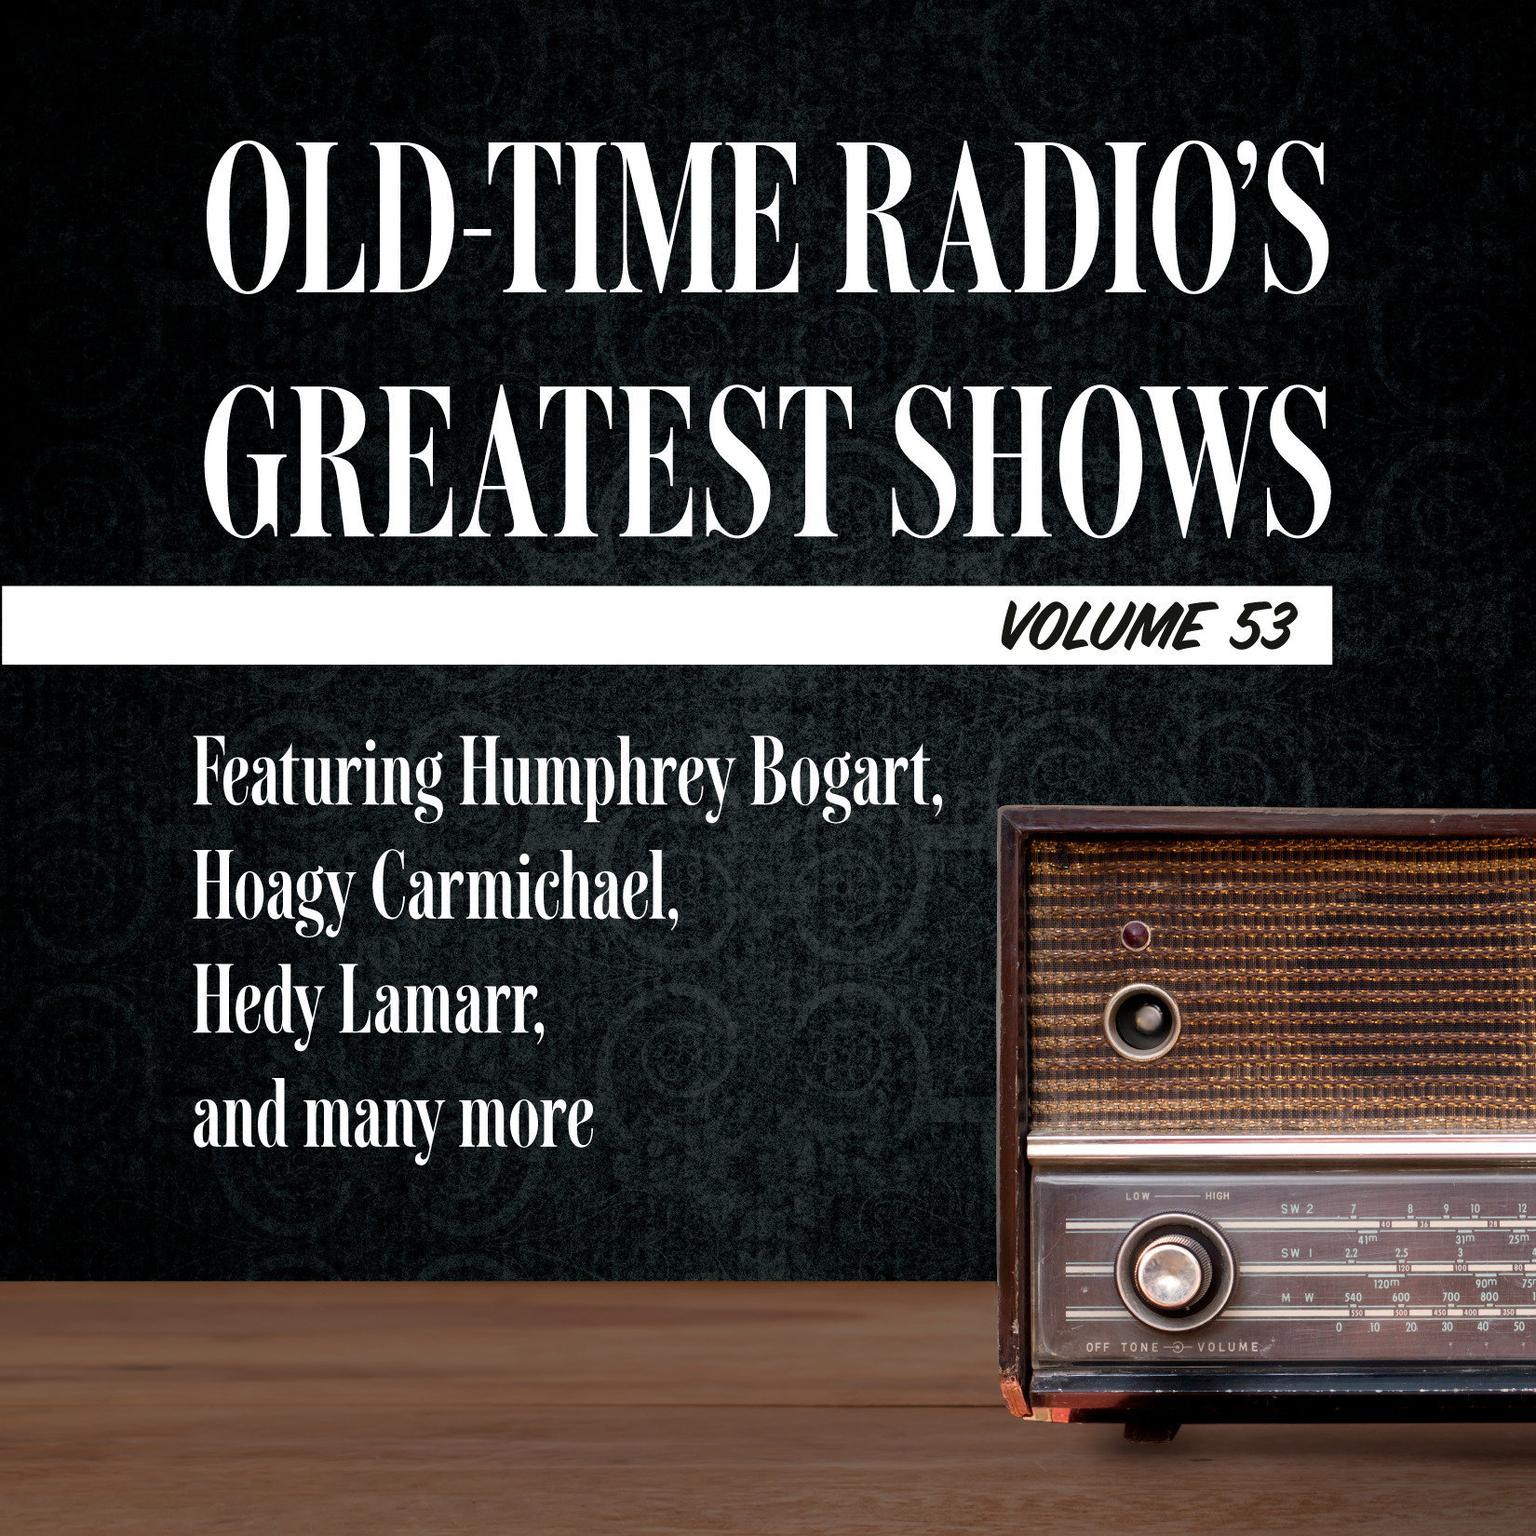 Old-Time Radios Greatest Shows, Volume 53: Featuring Humphrey Bogart, Hoagy Carmichael, Hedy Lamarr, and many more Audiobook, by Carl Amari